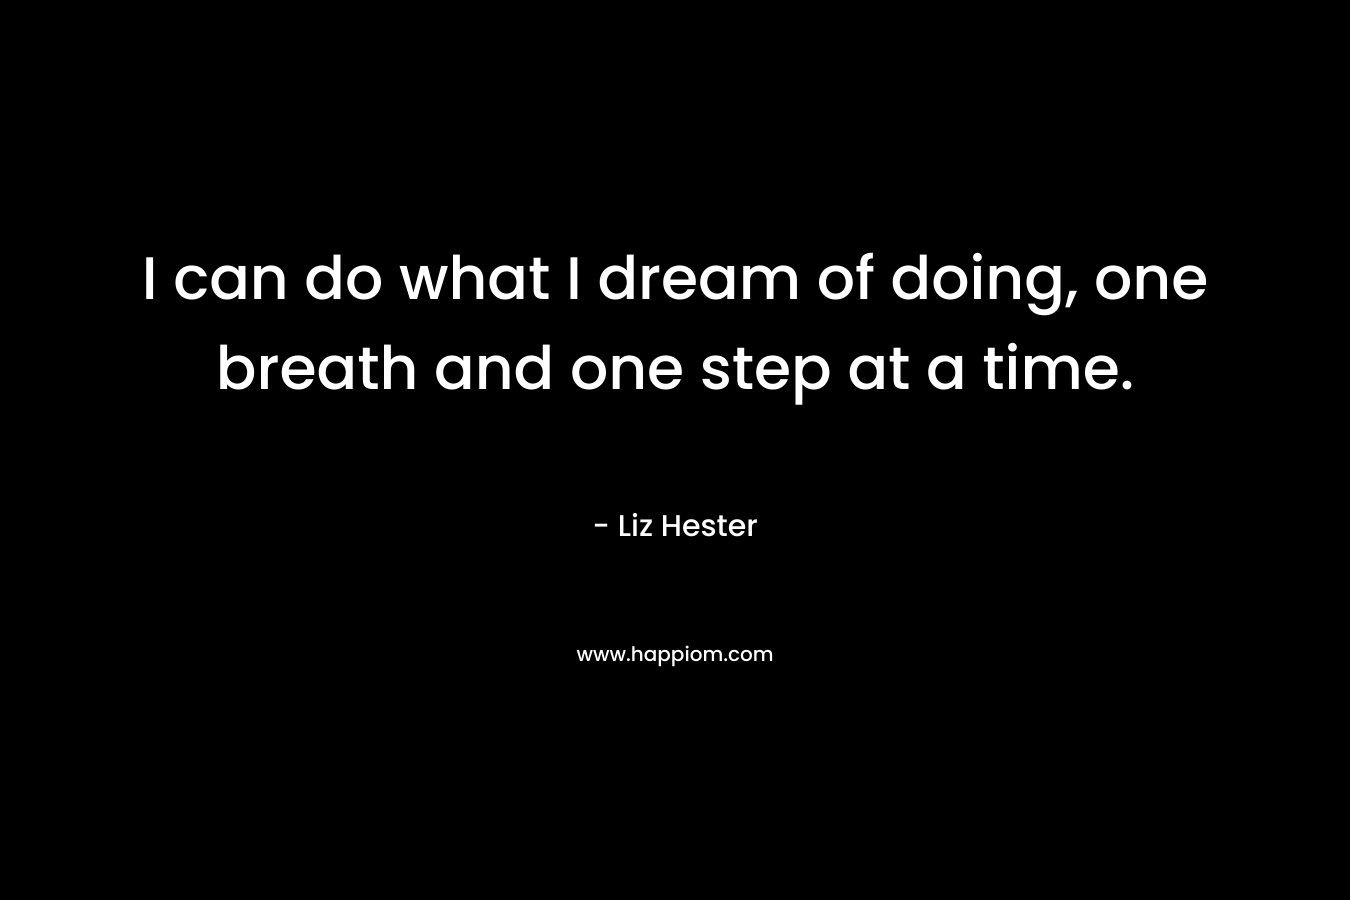 I can do what I dream of doing, one breath and one step at a time.